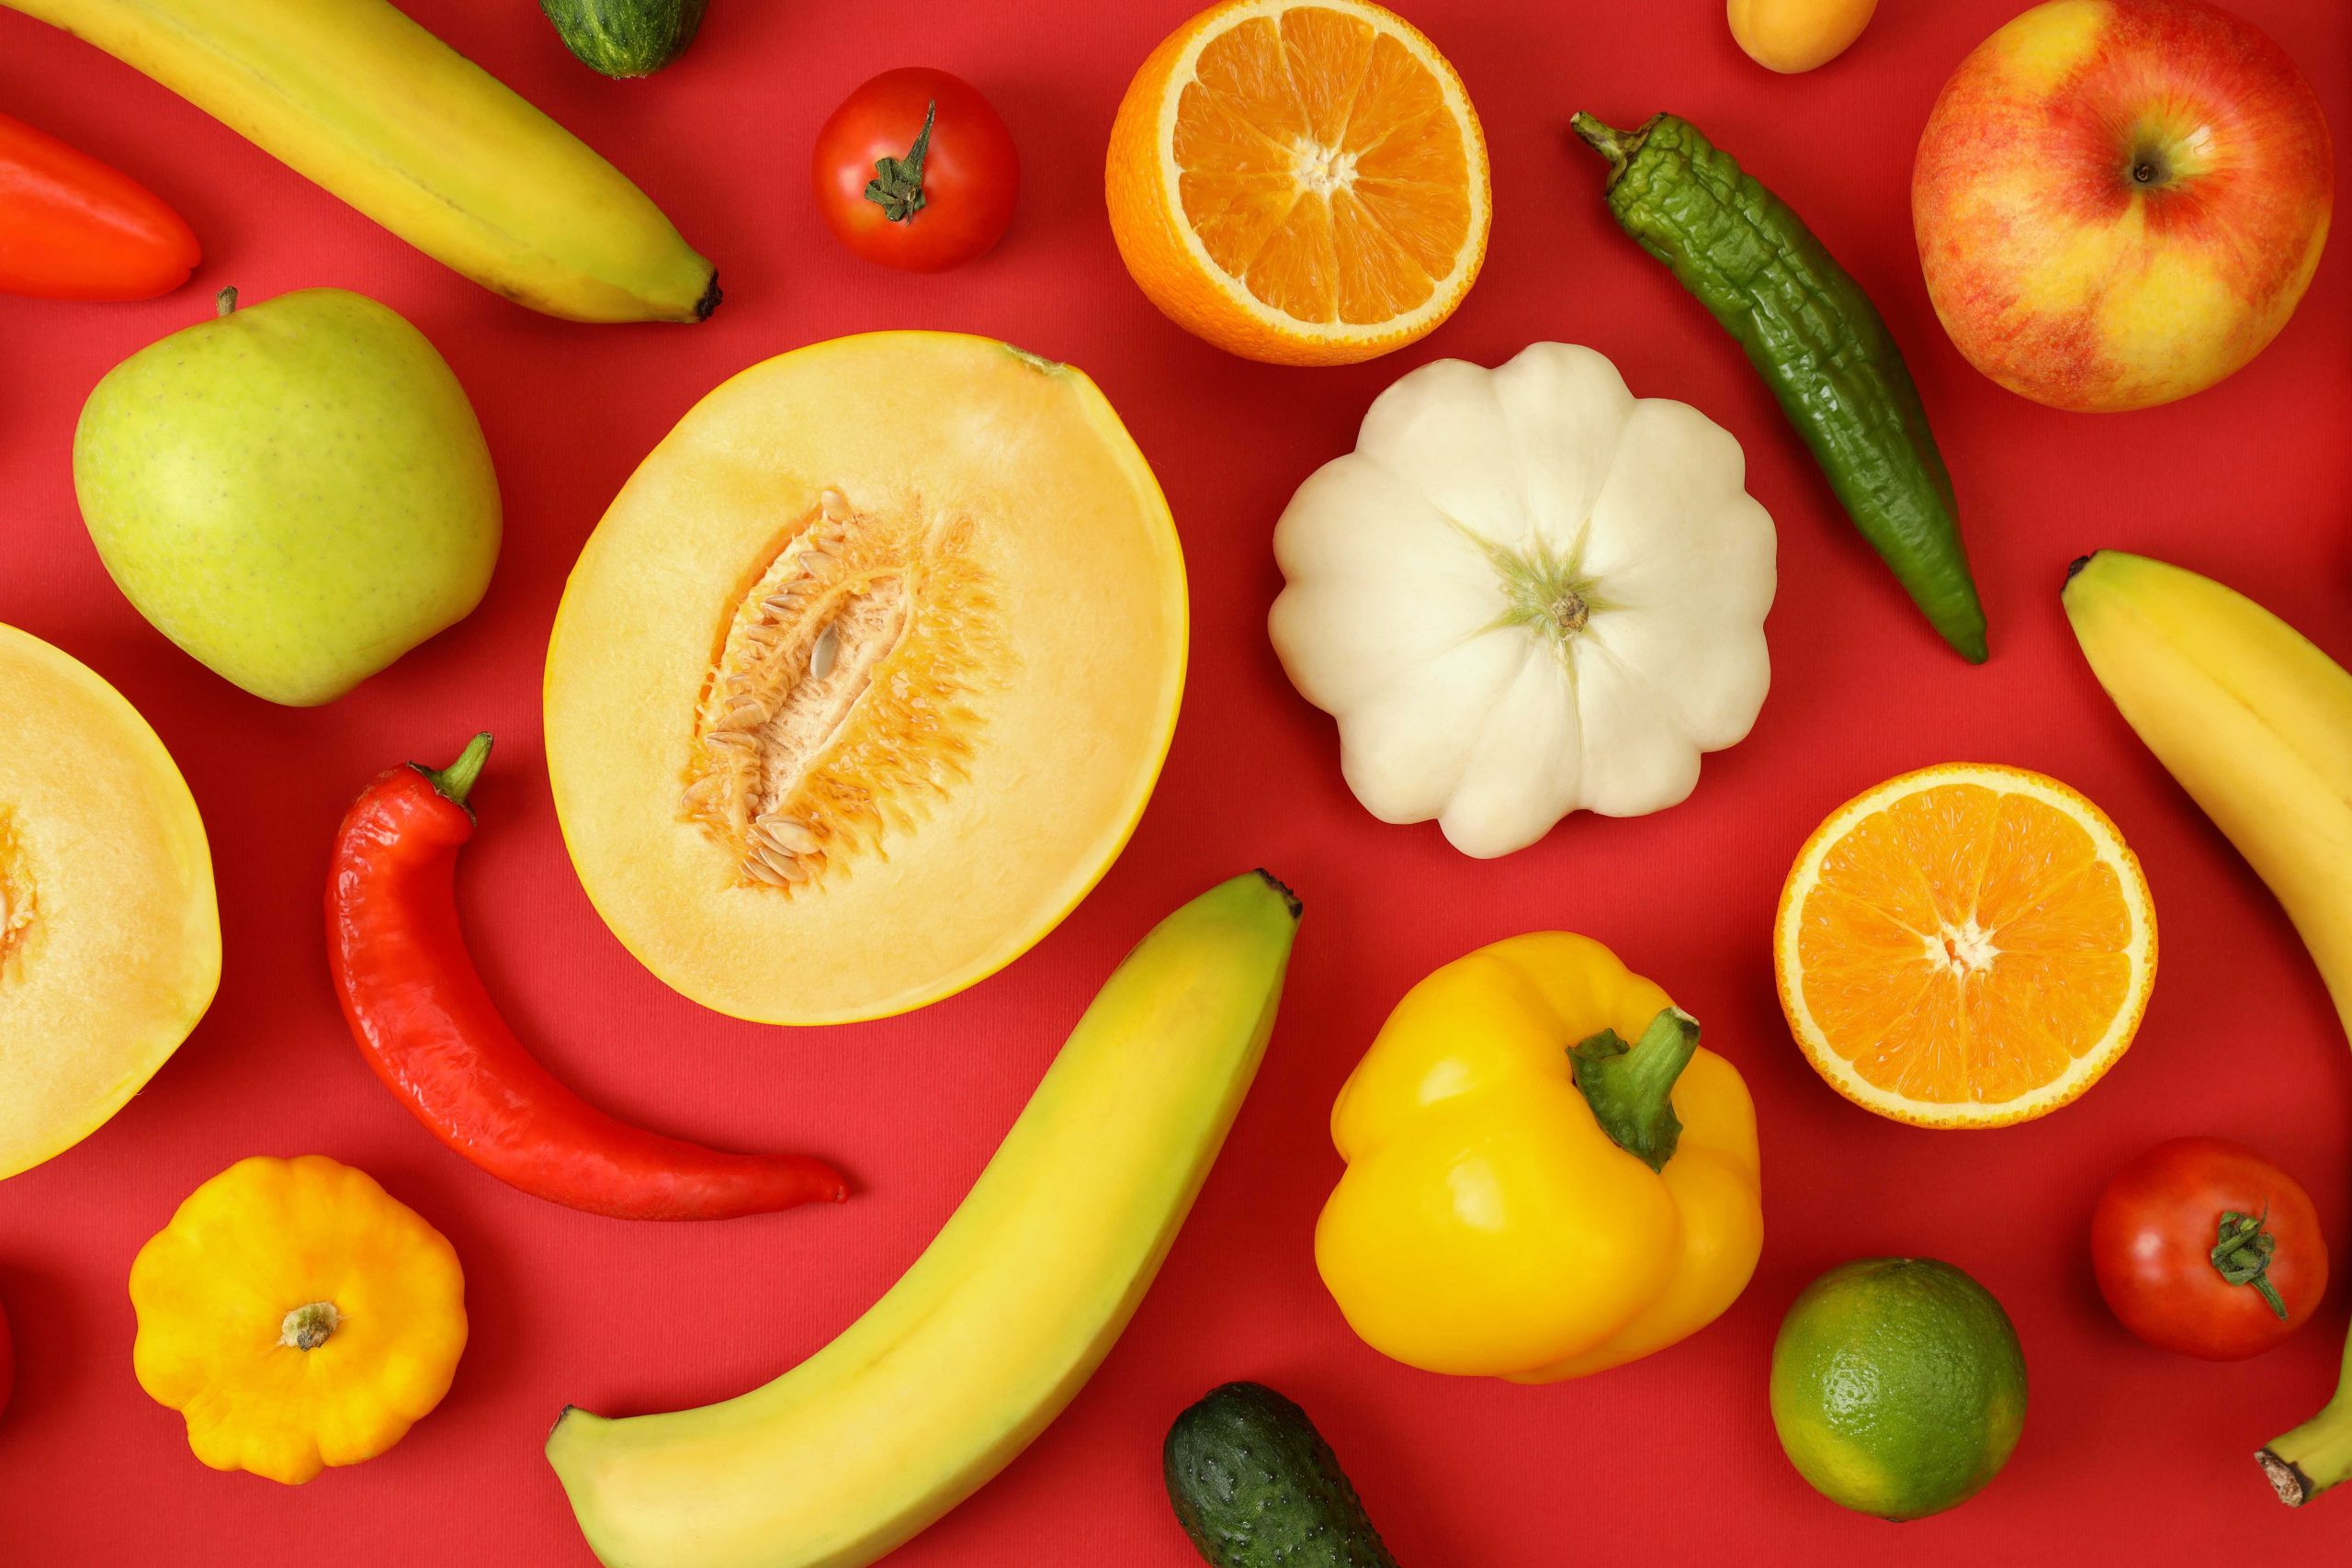 Set of different vegetables and fruits on red background